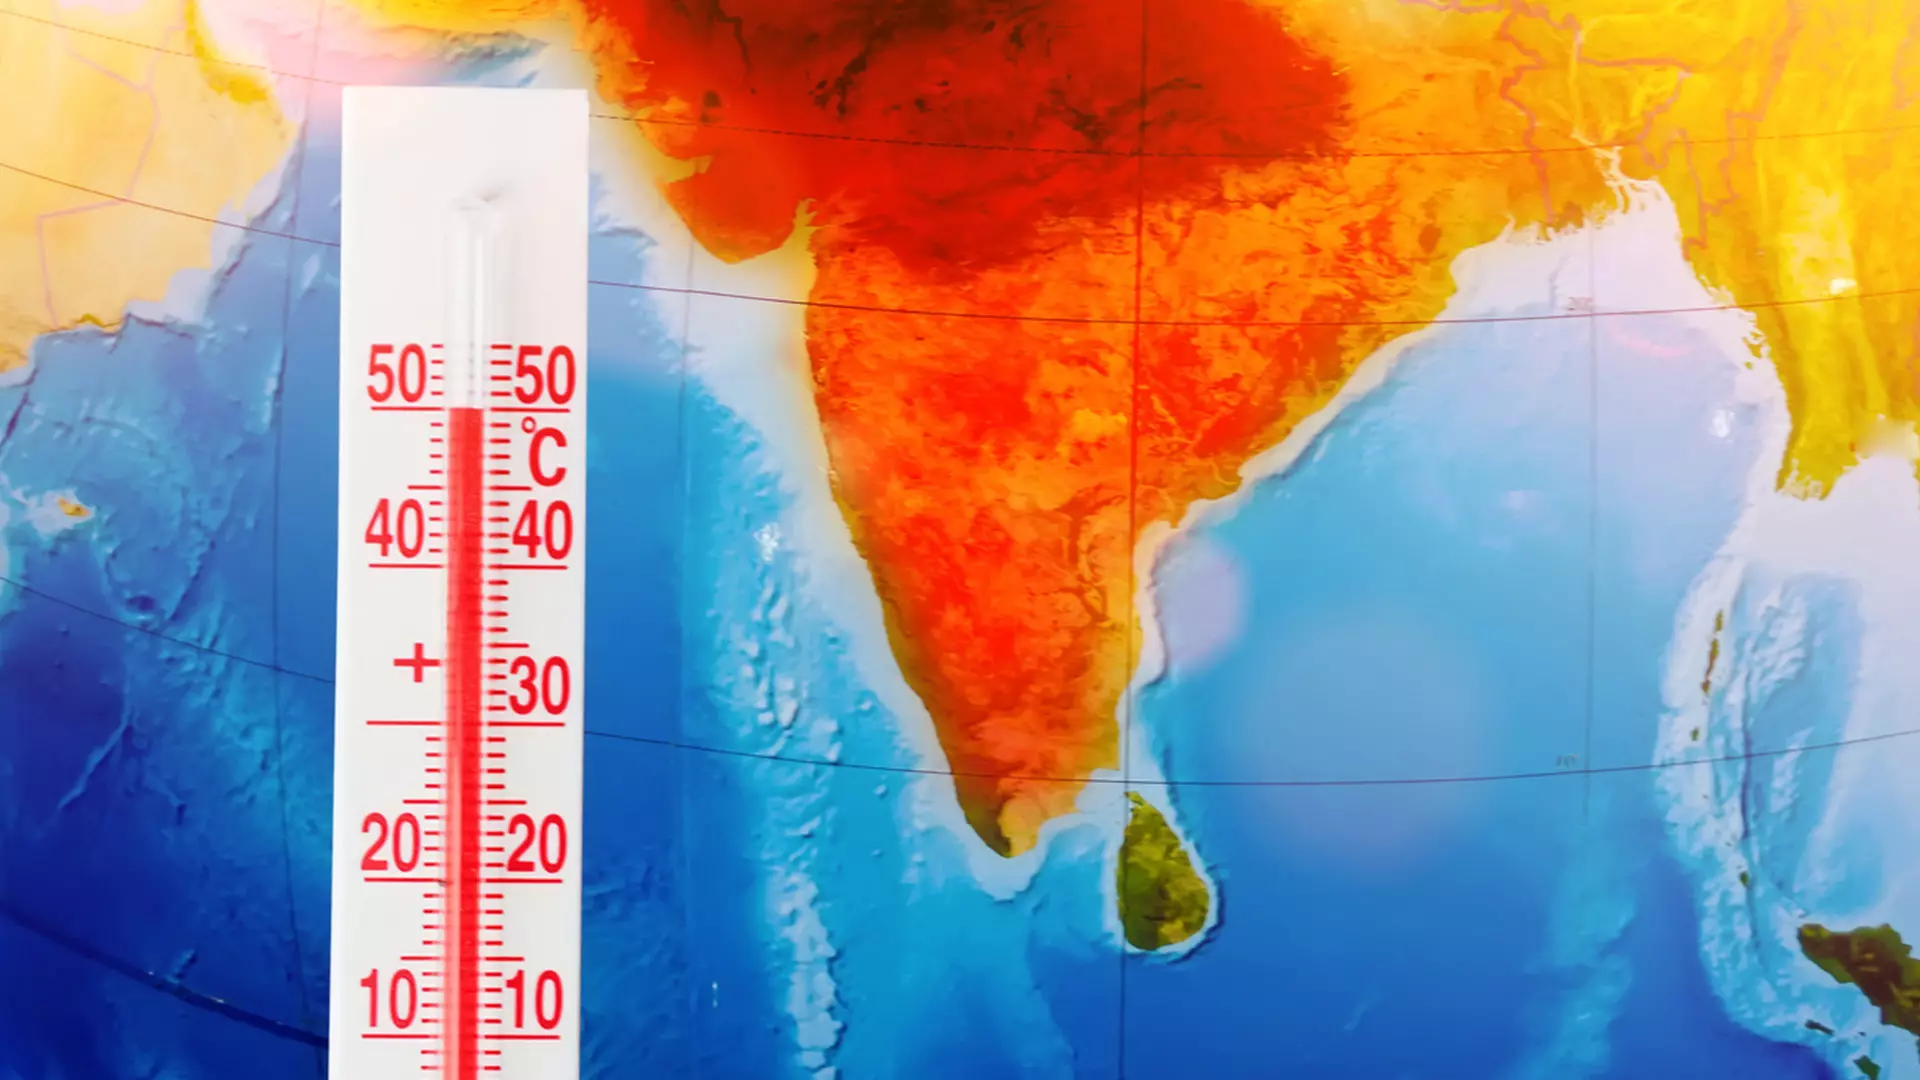 India suffered income loss equal to 6.3% of GDP from heatwaves: Lancet study